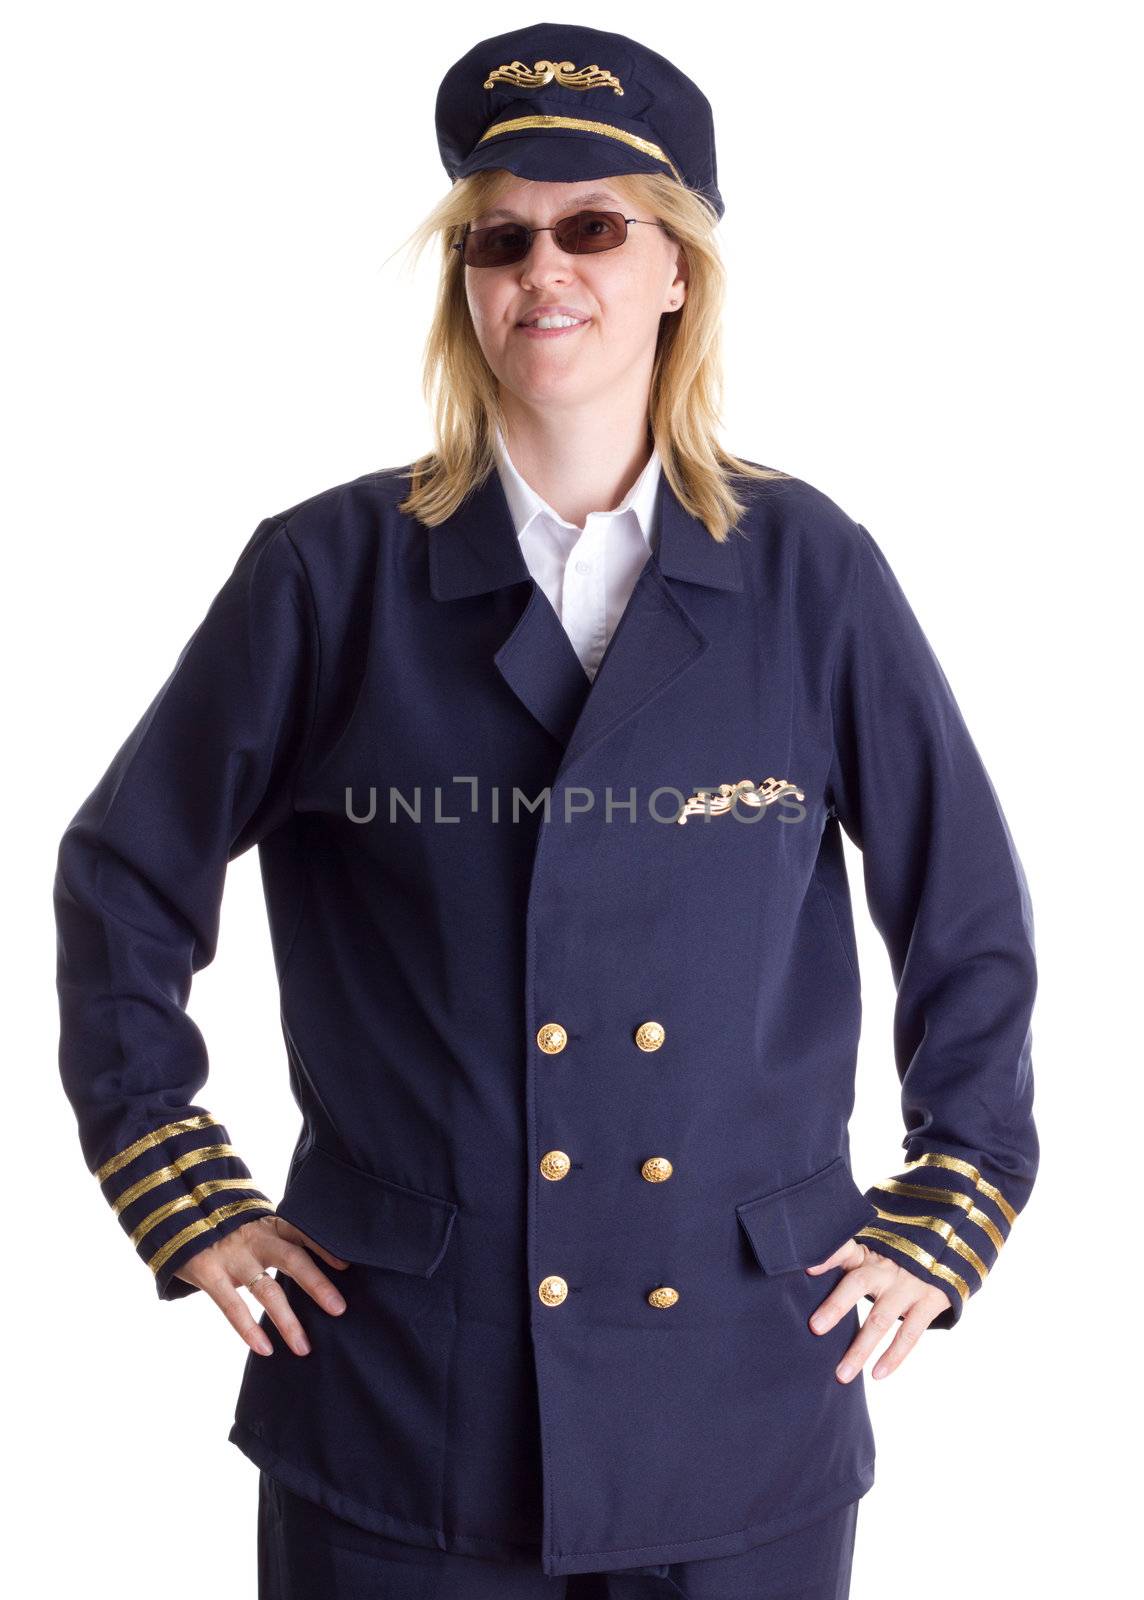 Female pilot standing firm in her job